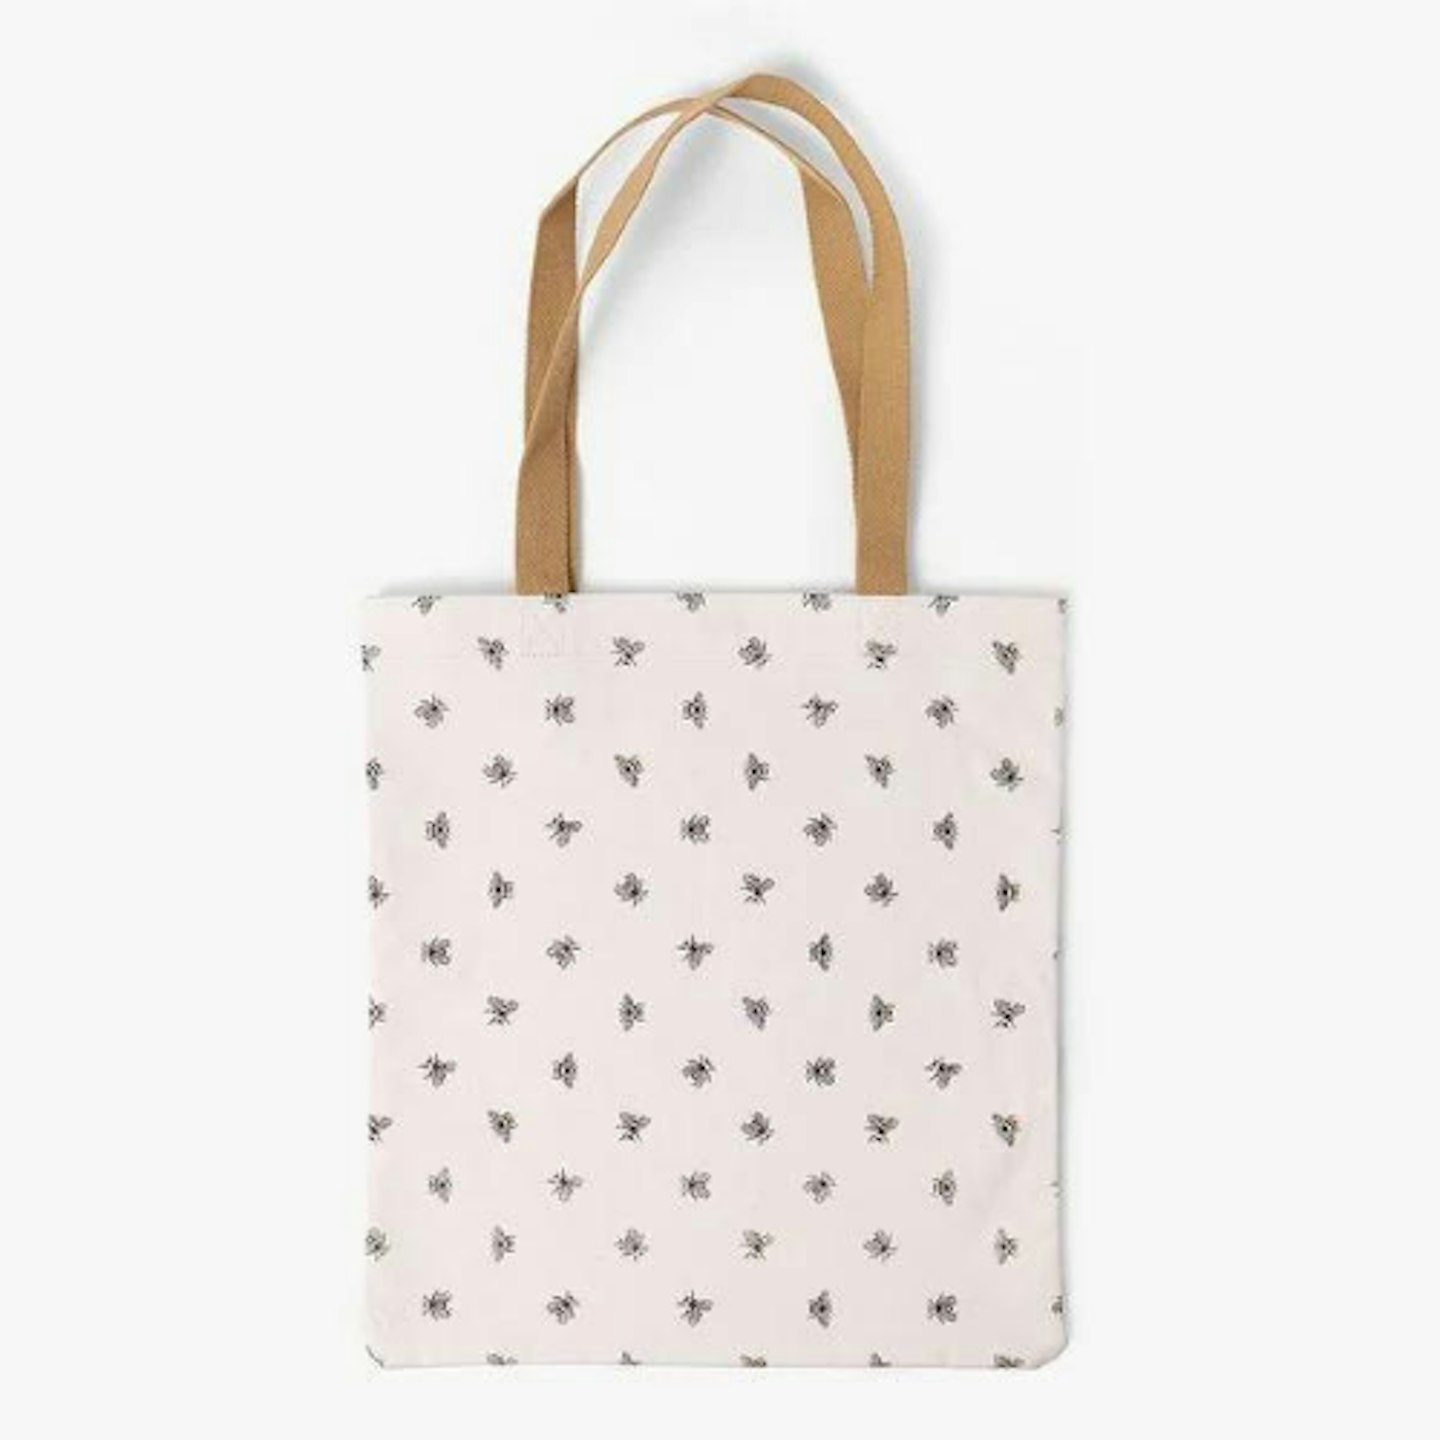 Paperchase tote bag with bee design and dark orange straps on a white background